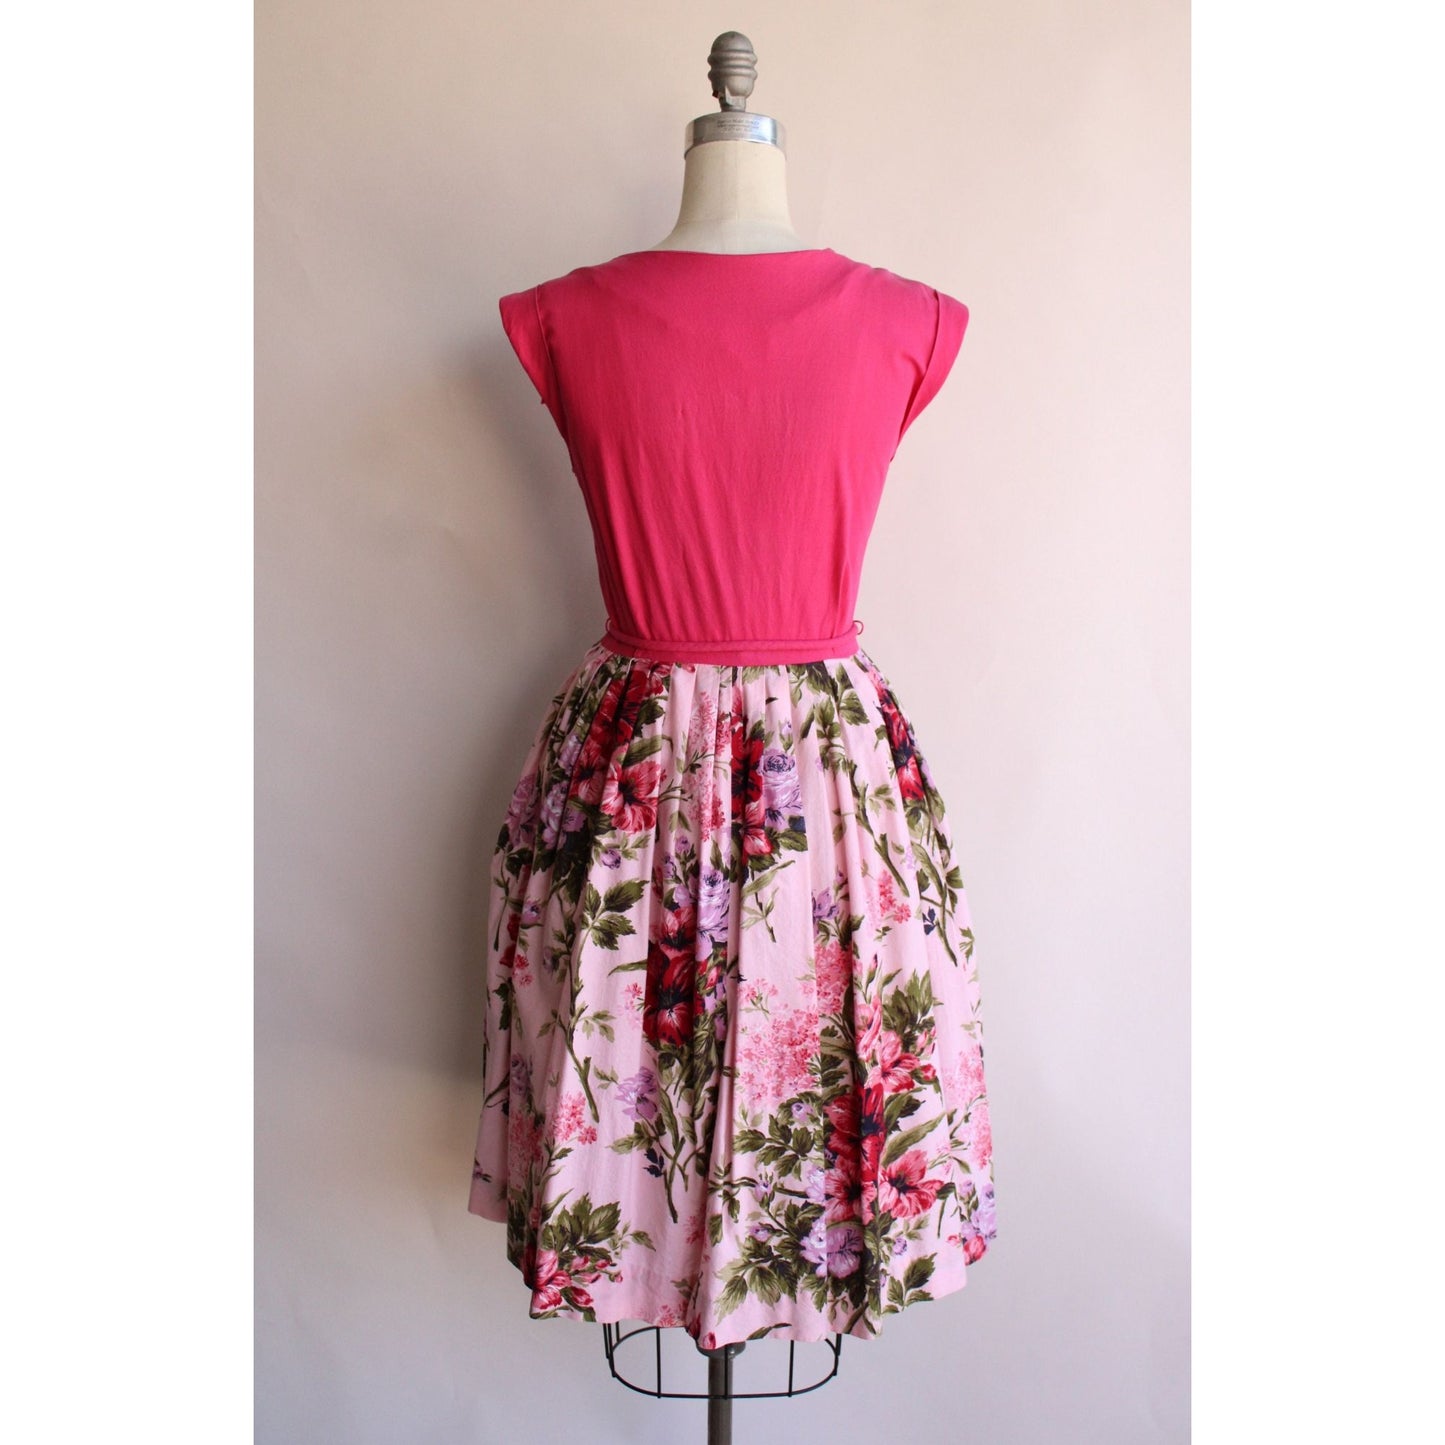 Vintage 1950s 1960s Kay Whitney Dress with Pocket and Belt